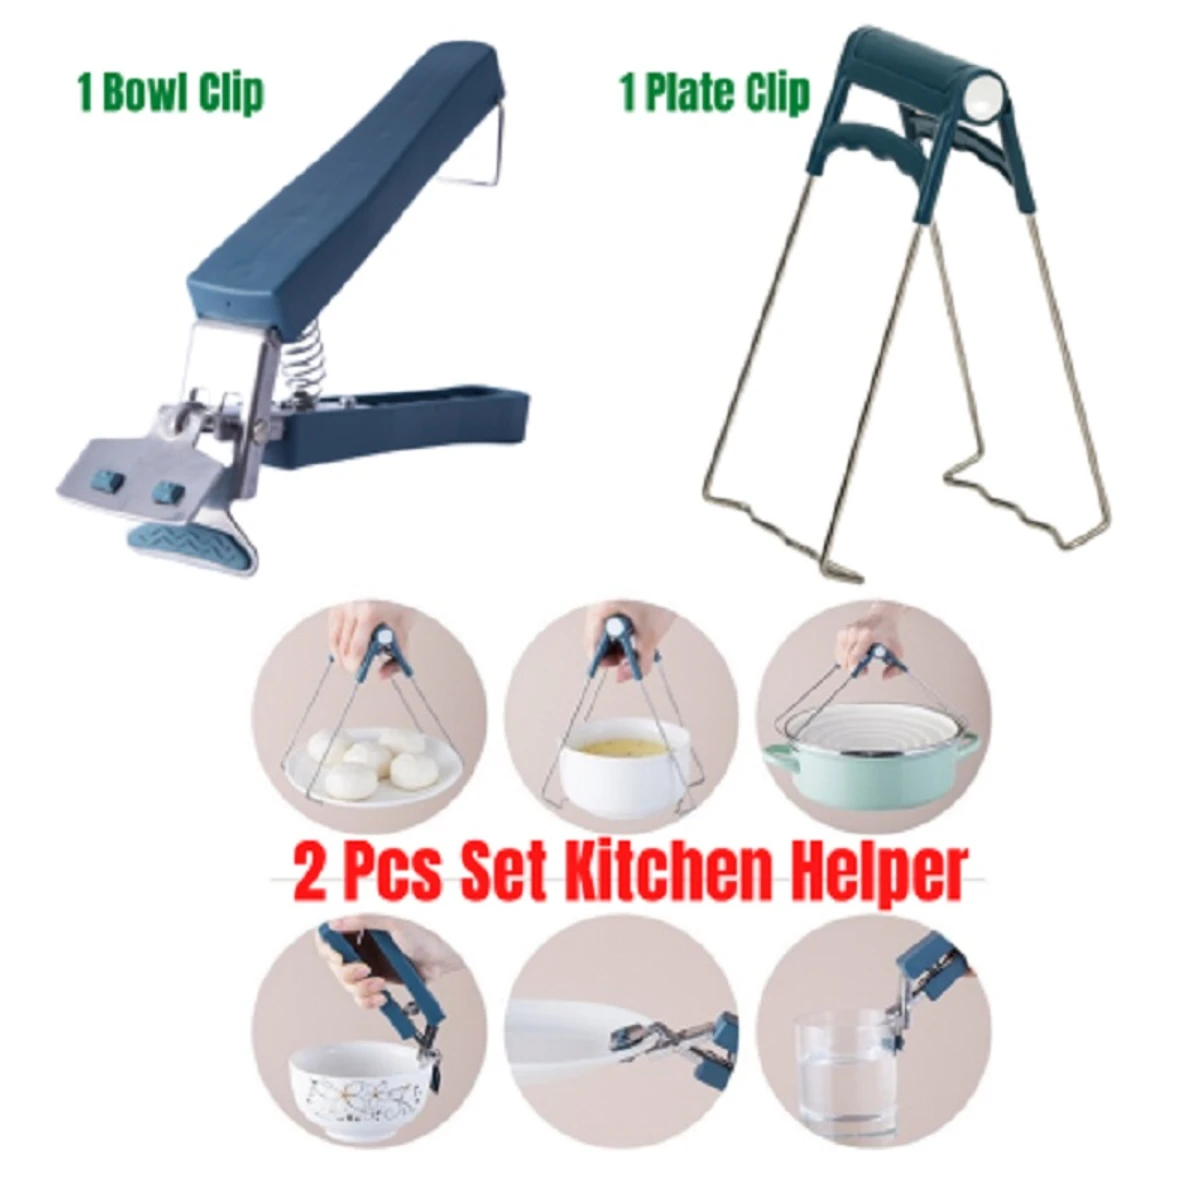 2 pcs Kitchen Tools Set Bowl Clip Anti-scalding Clip Bowl Clip Plate Clip Steamed Dishes Clamp Anti-slip Anti-Scalding Hand Clip Plat